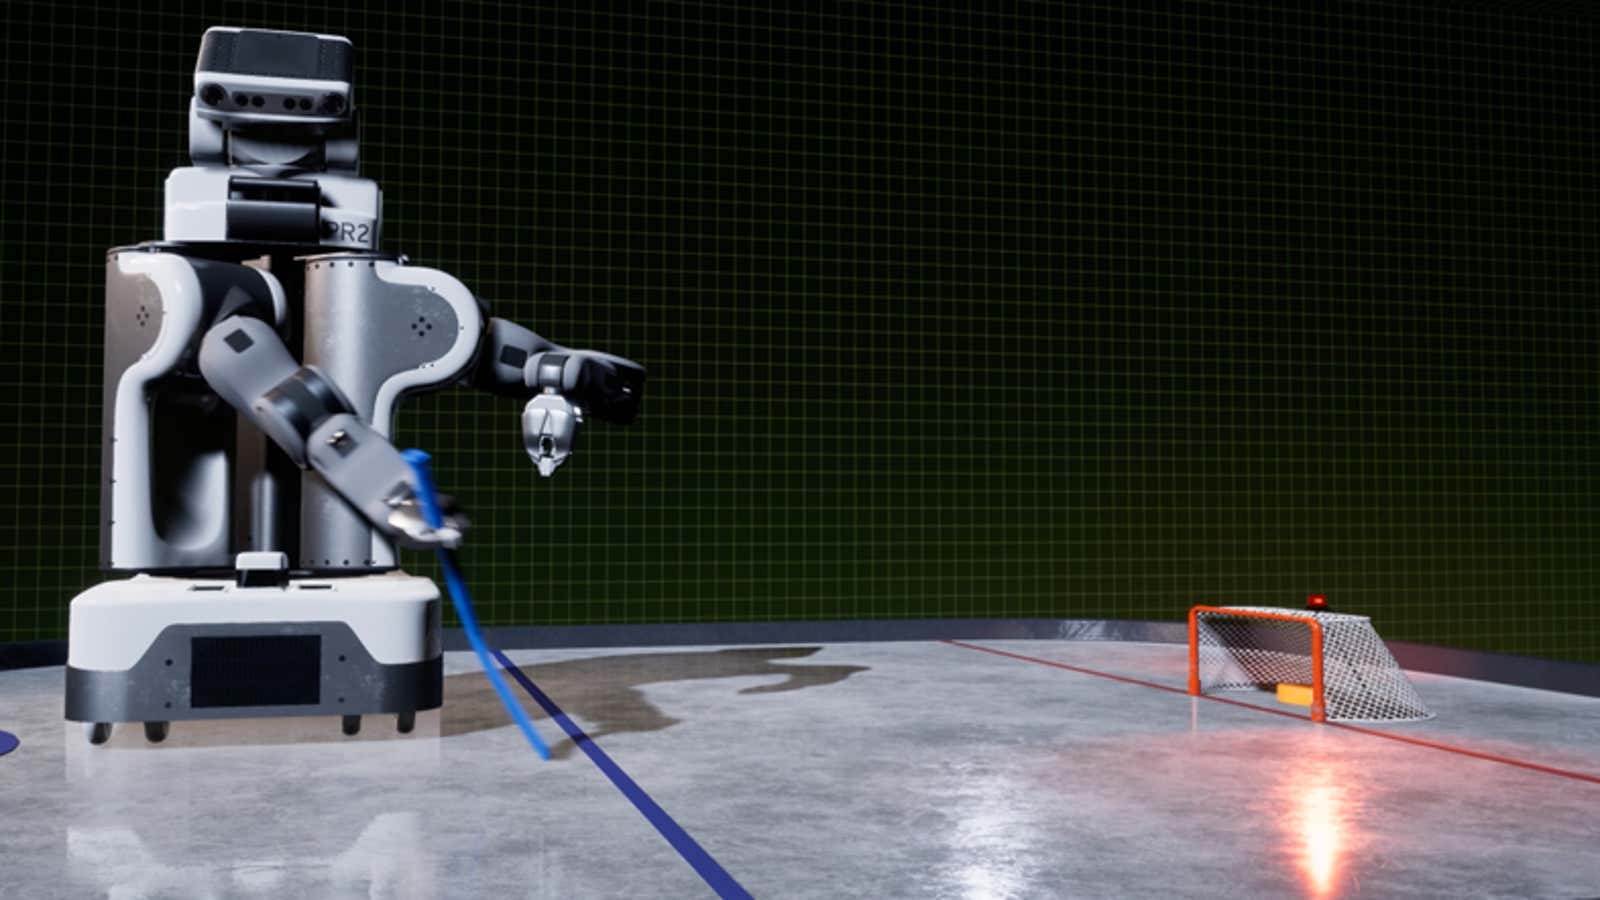 A simulated robot plays hockey.